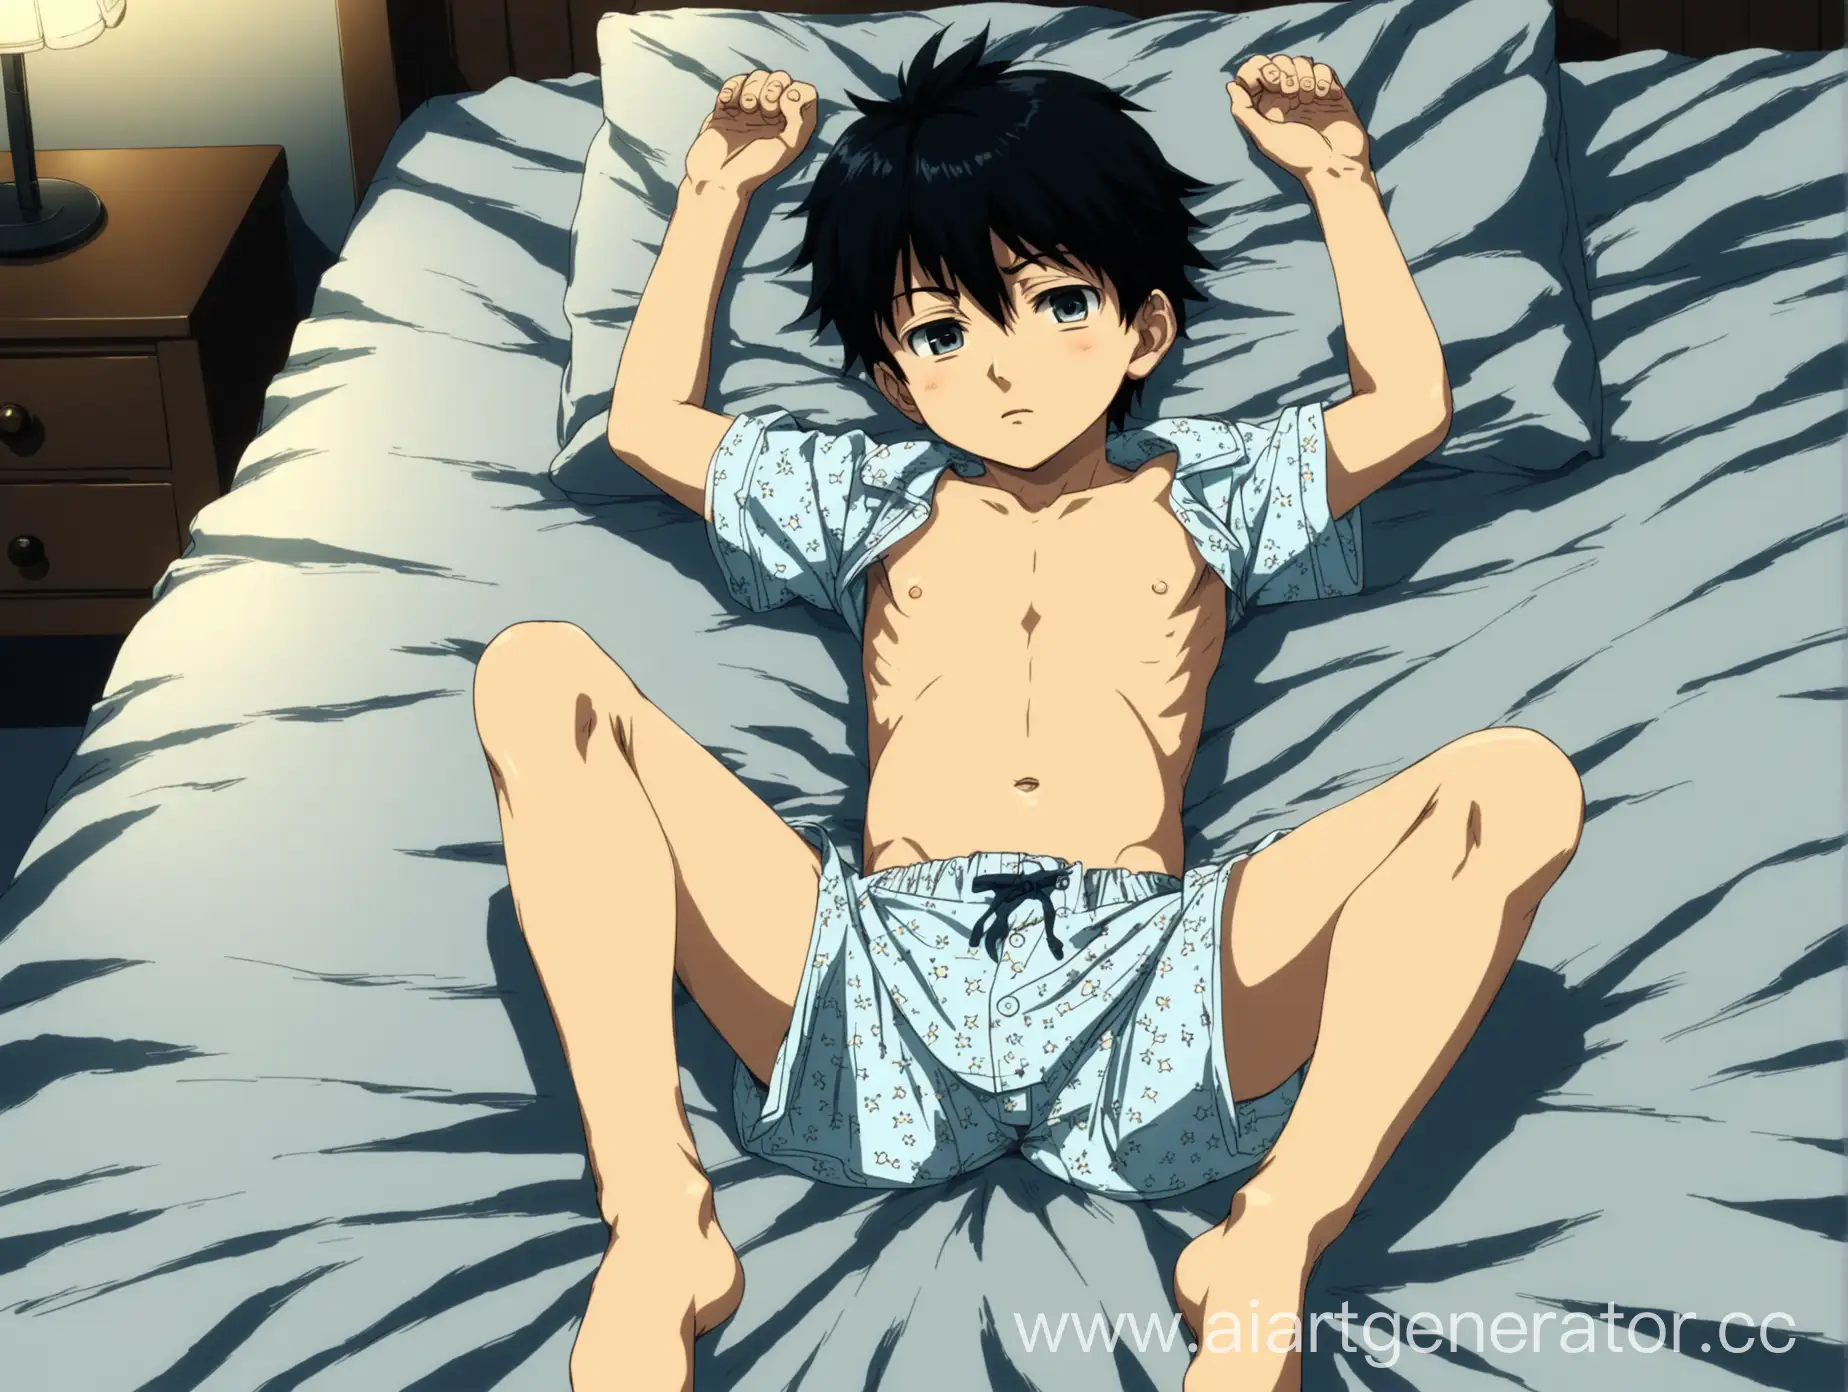 Relaxed-Little-Boy-in-Pajamas-Comfortable-Anime-Style-Illustration